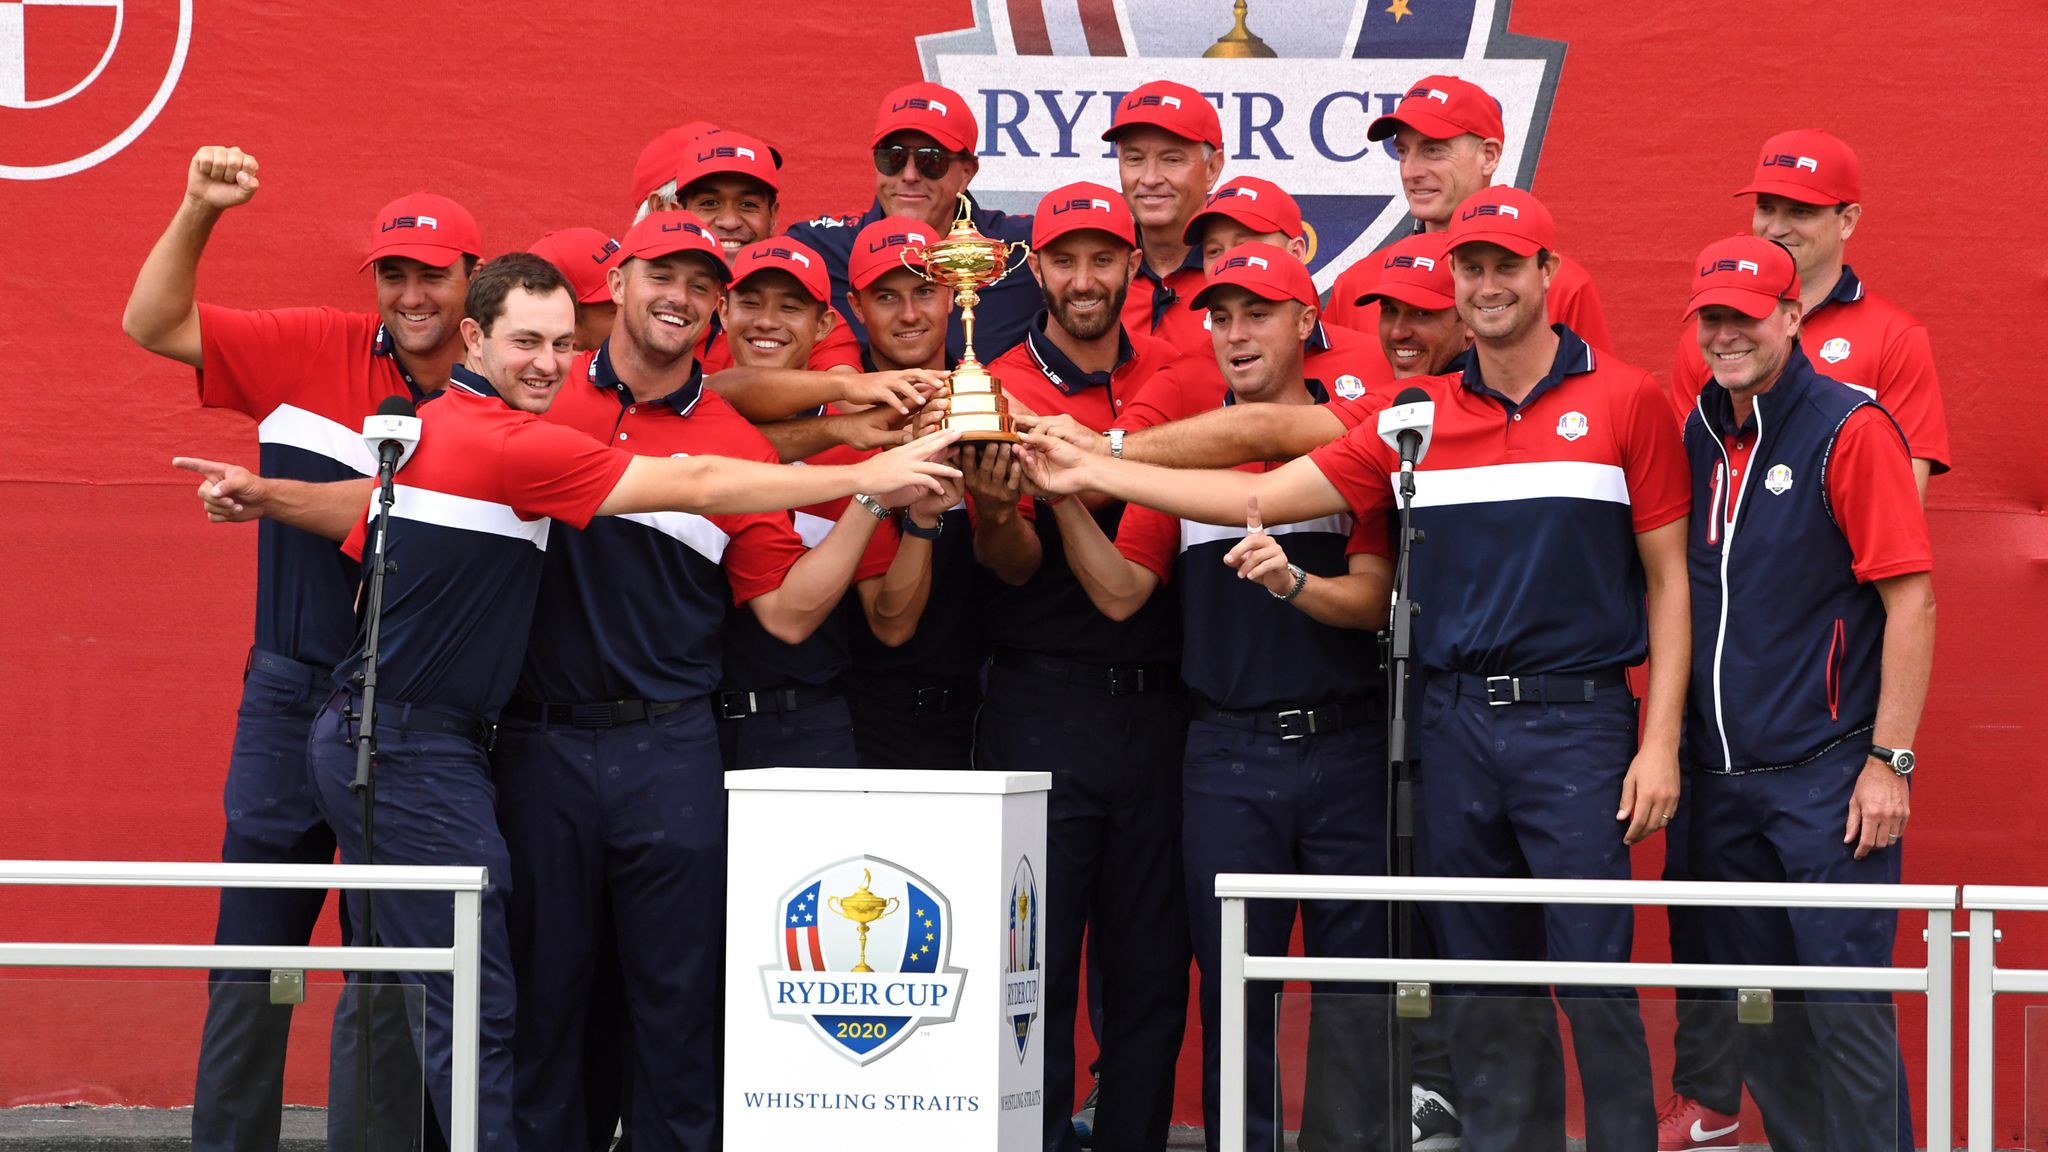 American golfers won the prestigious Ryder Cup 2020 tournament and their celebration was a sight to behold! See the incredible image of the victorious Ryder Cup USA team!